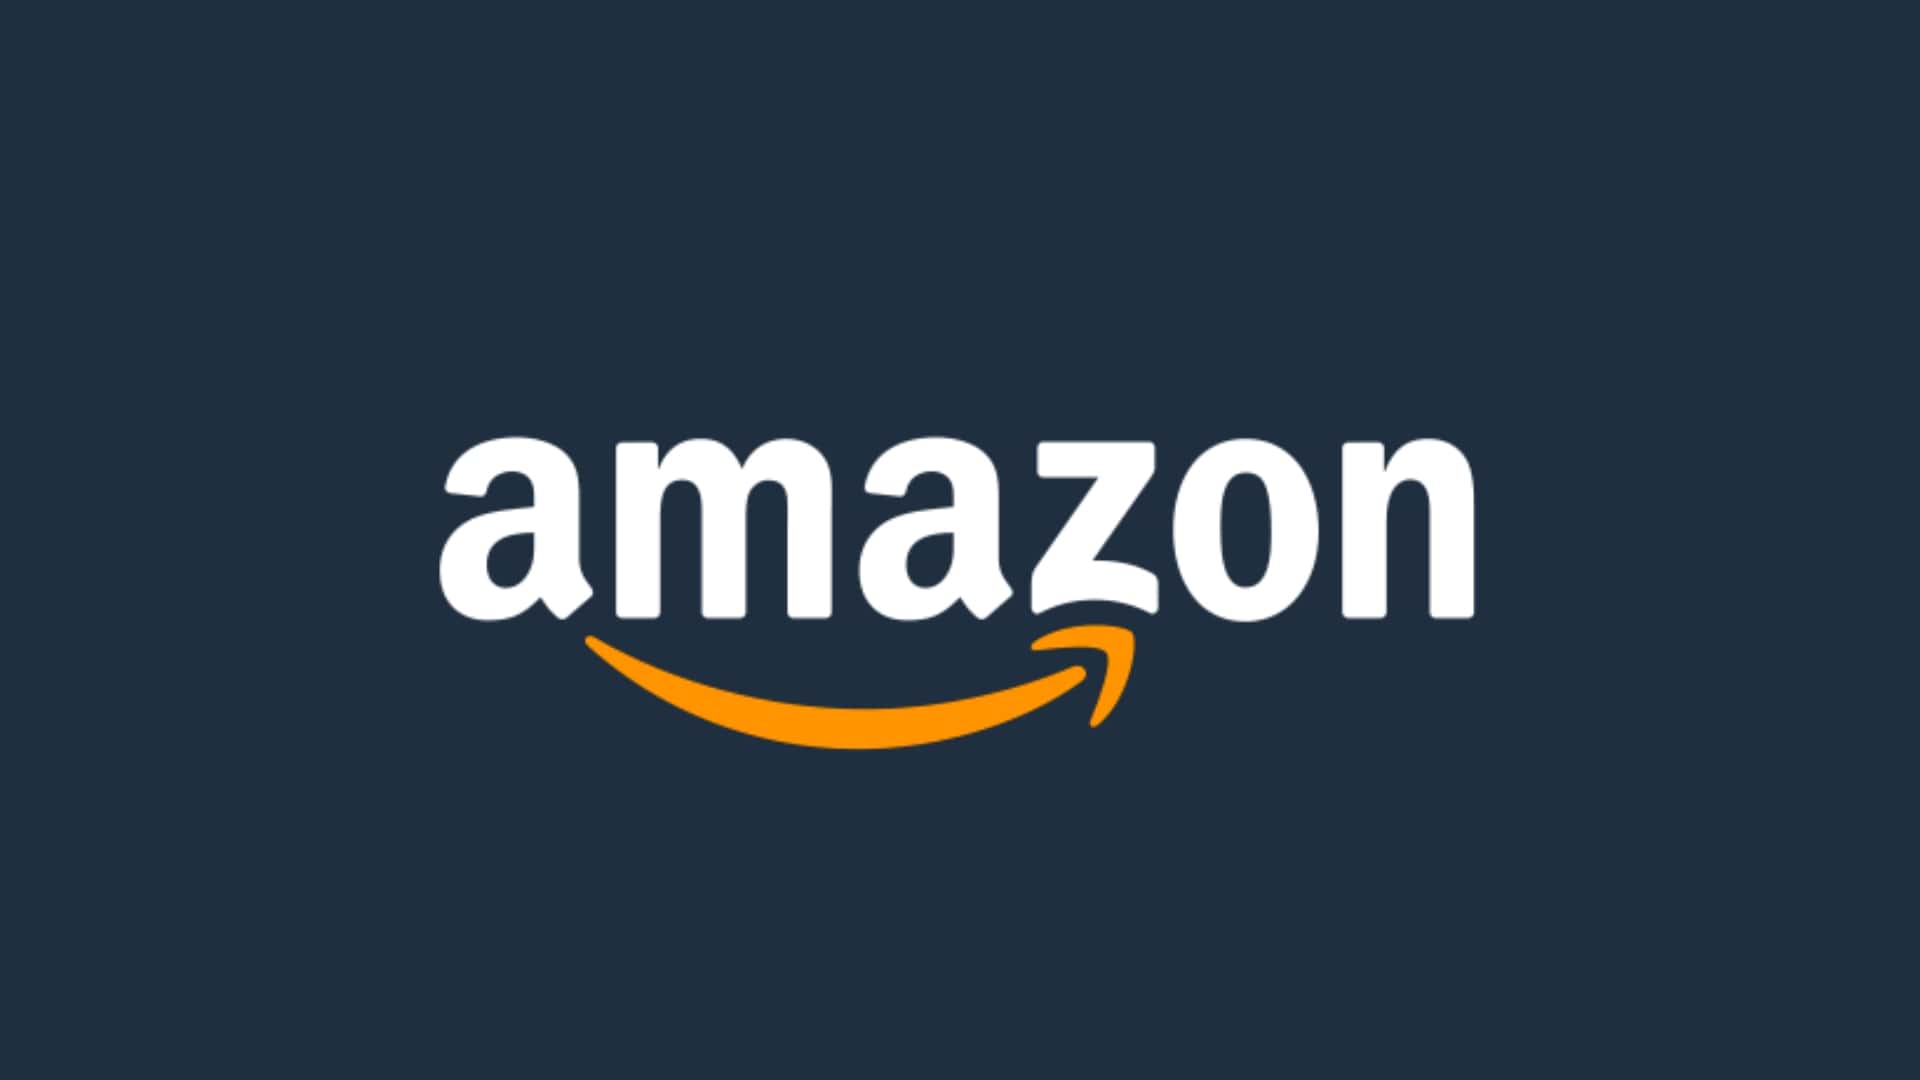 how to start amazon business in uae